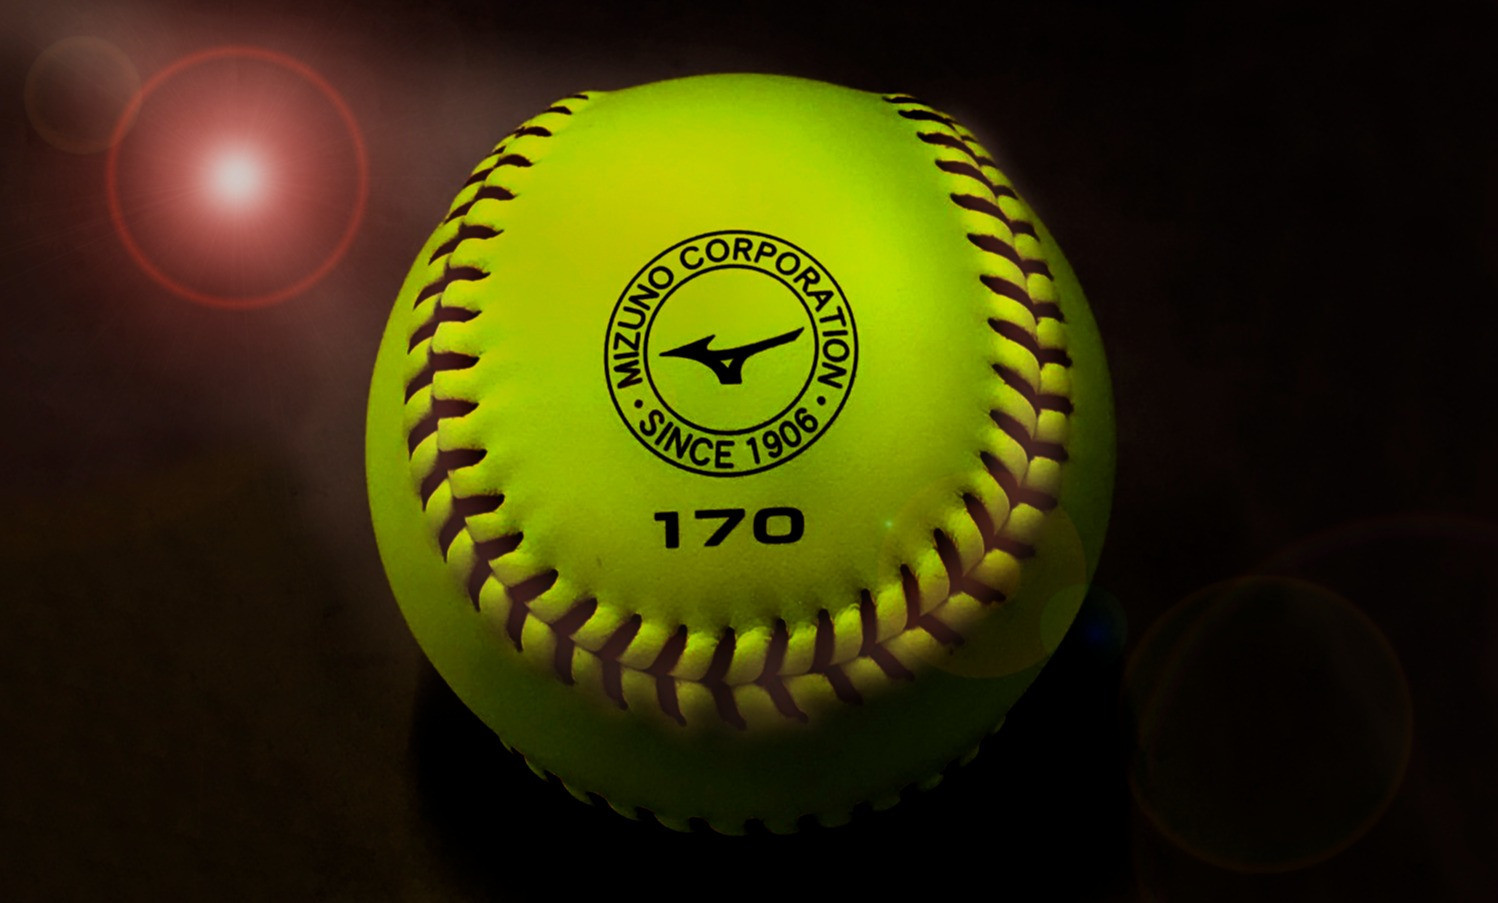 WBSC and Mizuno have unveiled a sustainable ball to be used at softball World Cup events ©WBSC